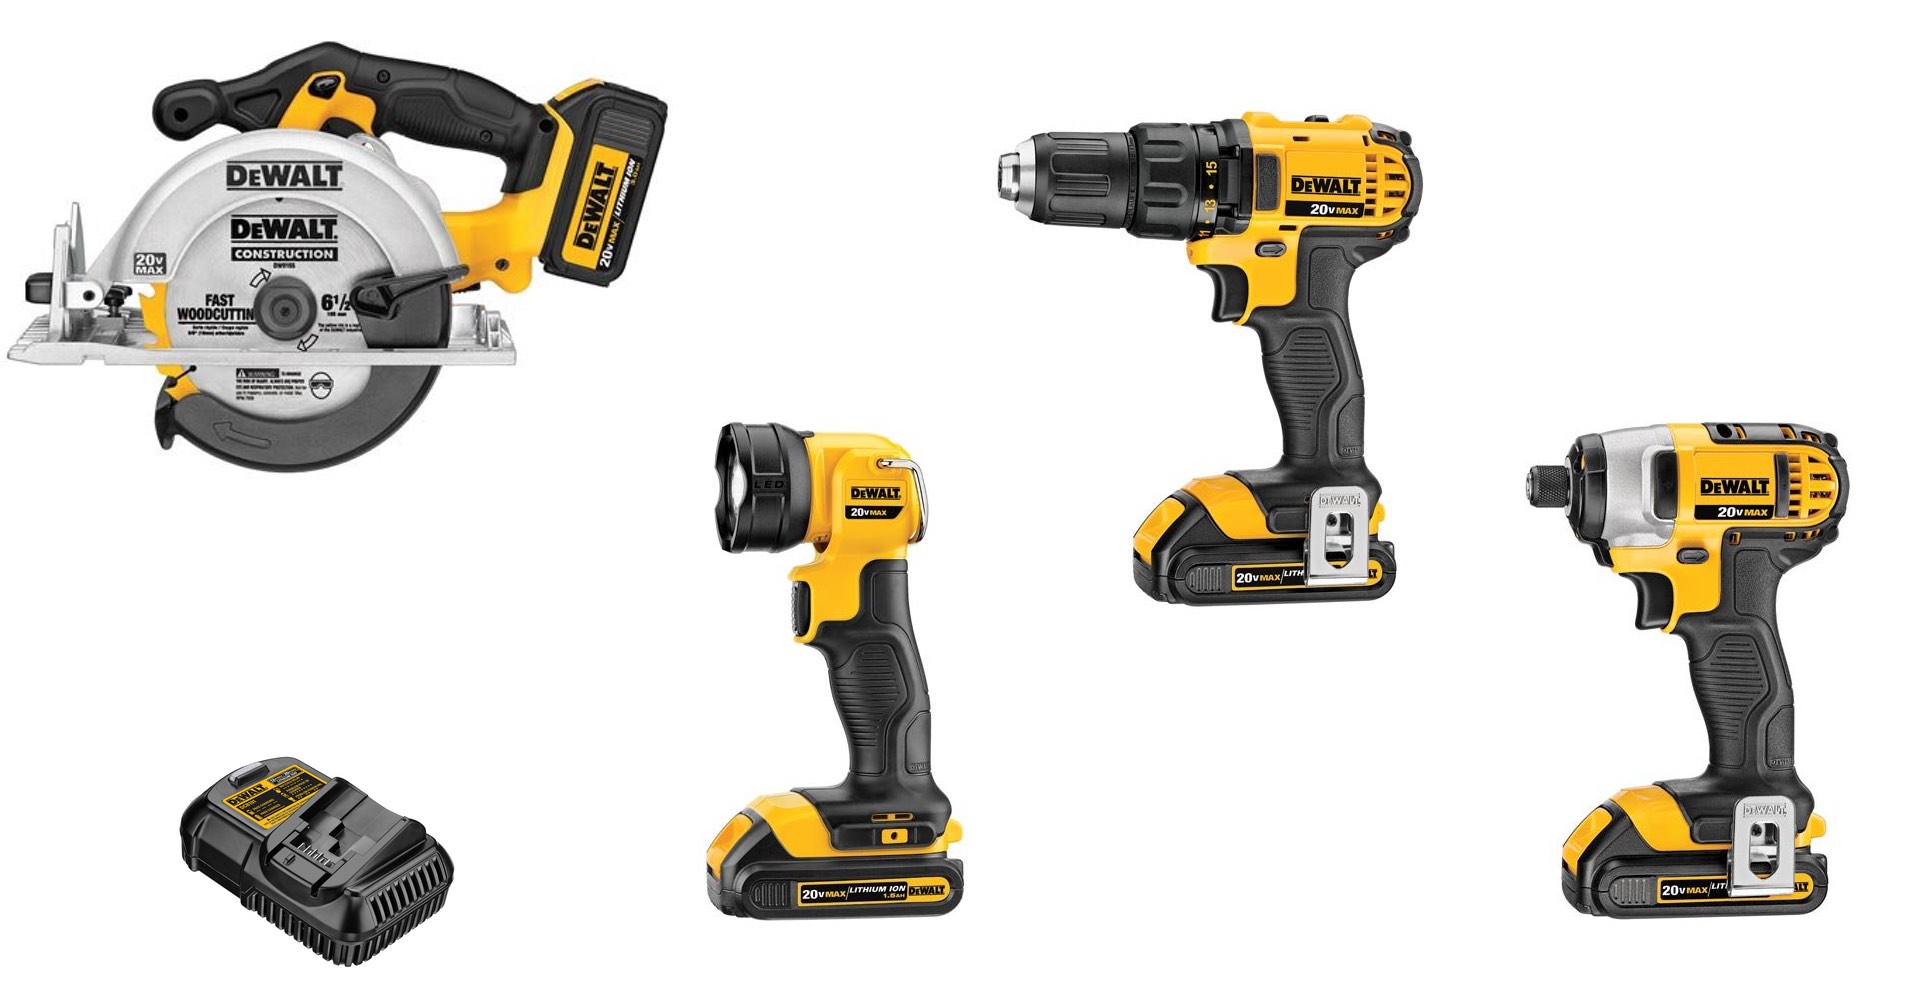 The Dewalt 4-Tool Combo kit. Save $200 off the street price and get some power tool staples.